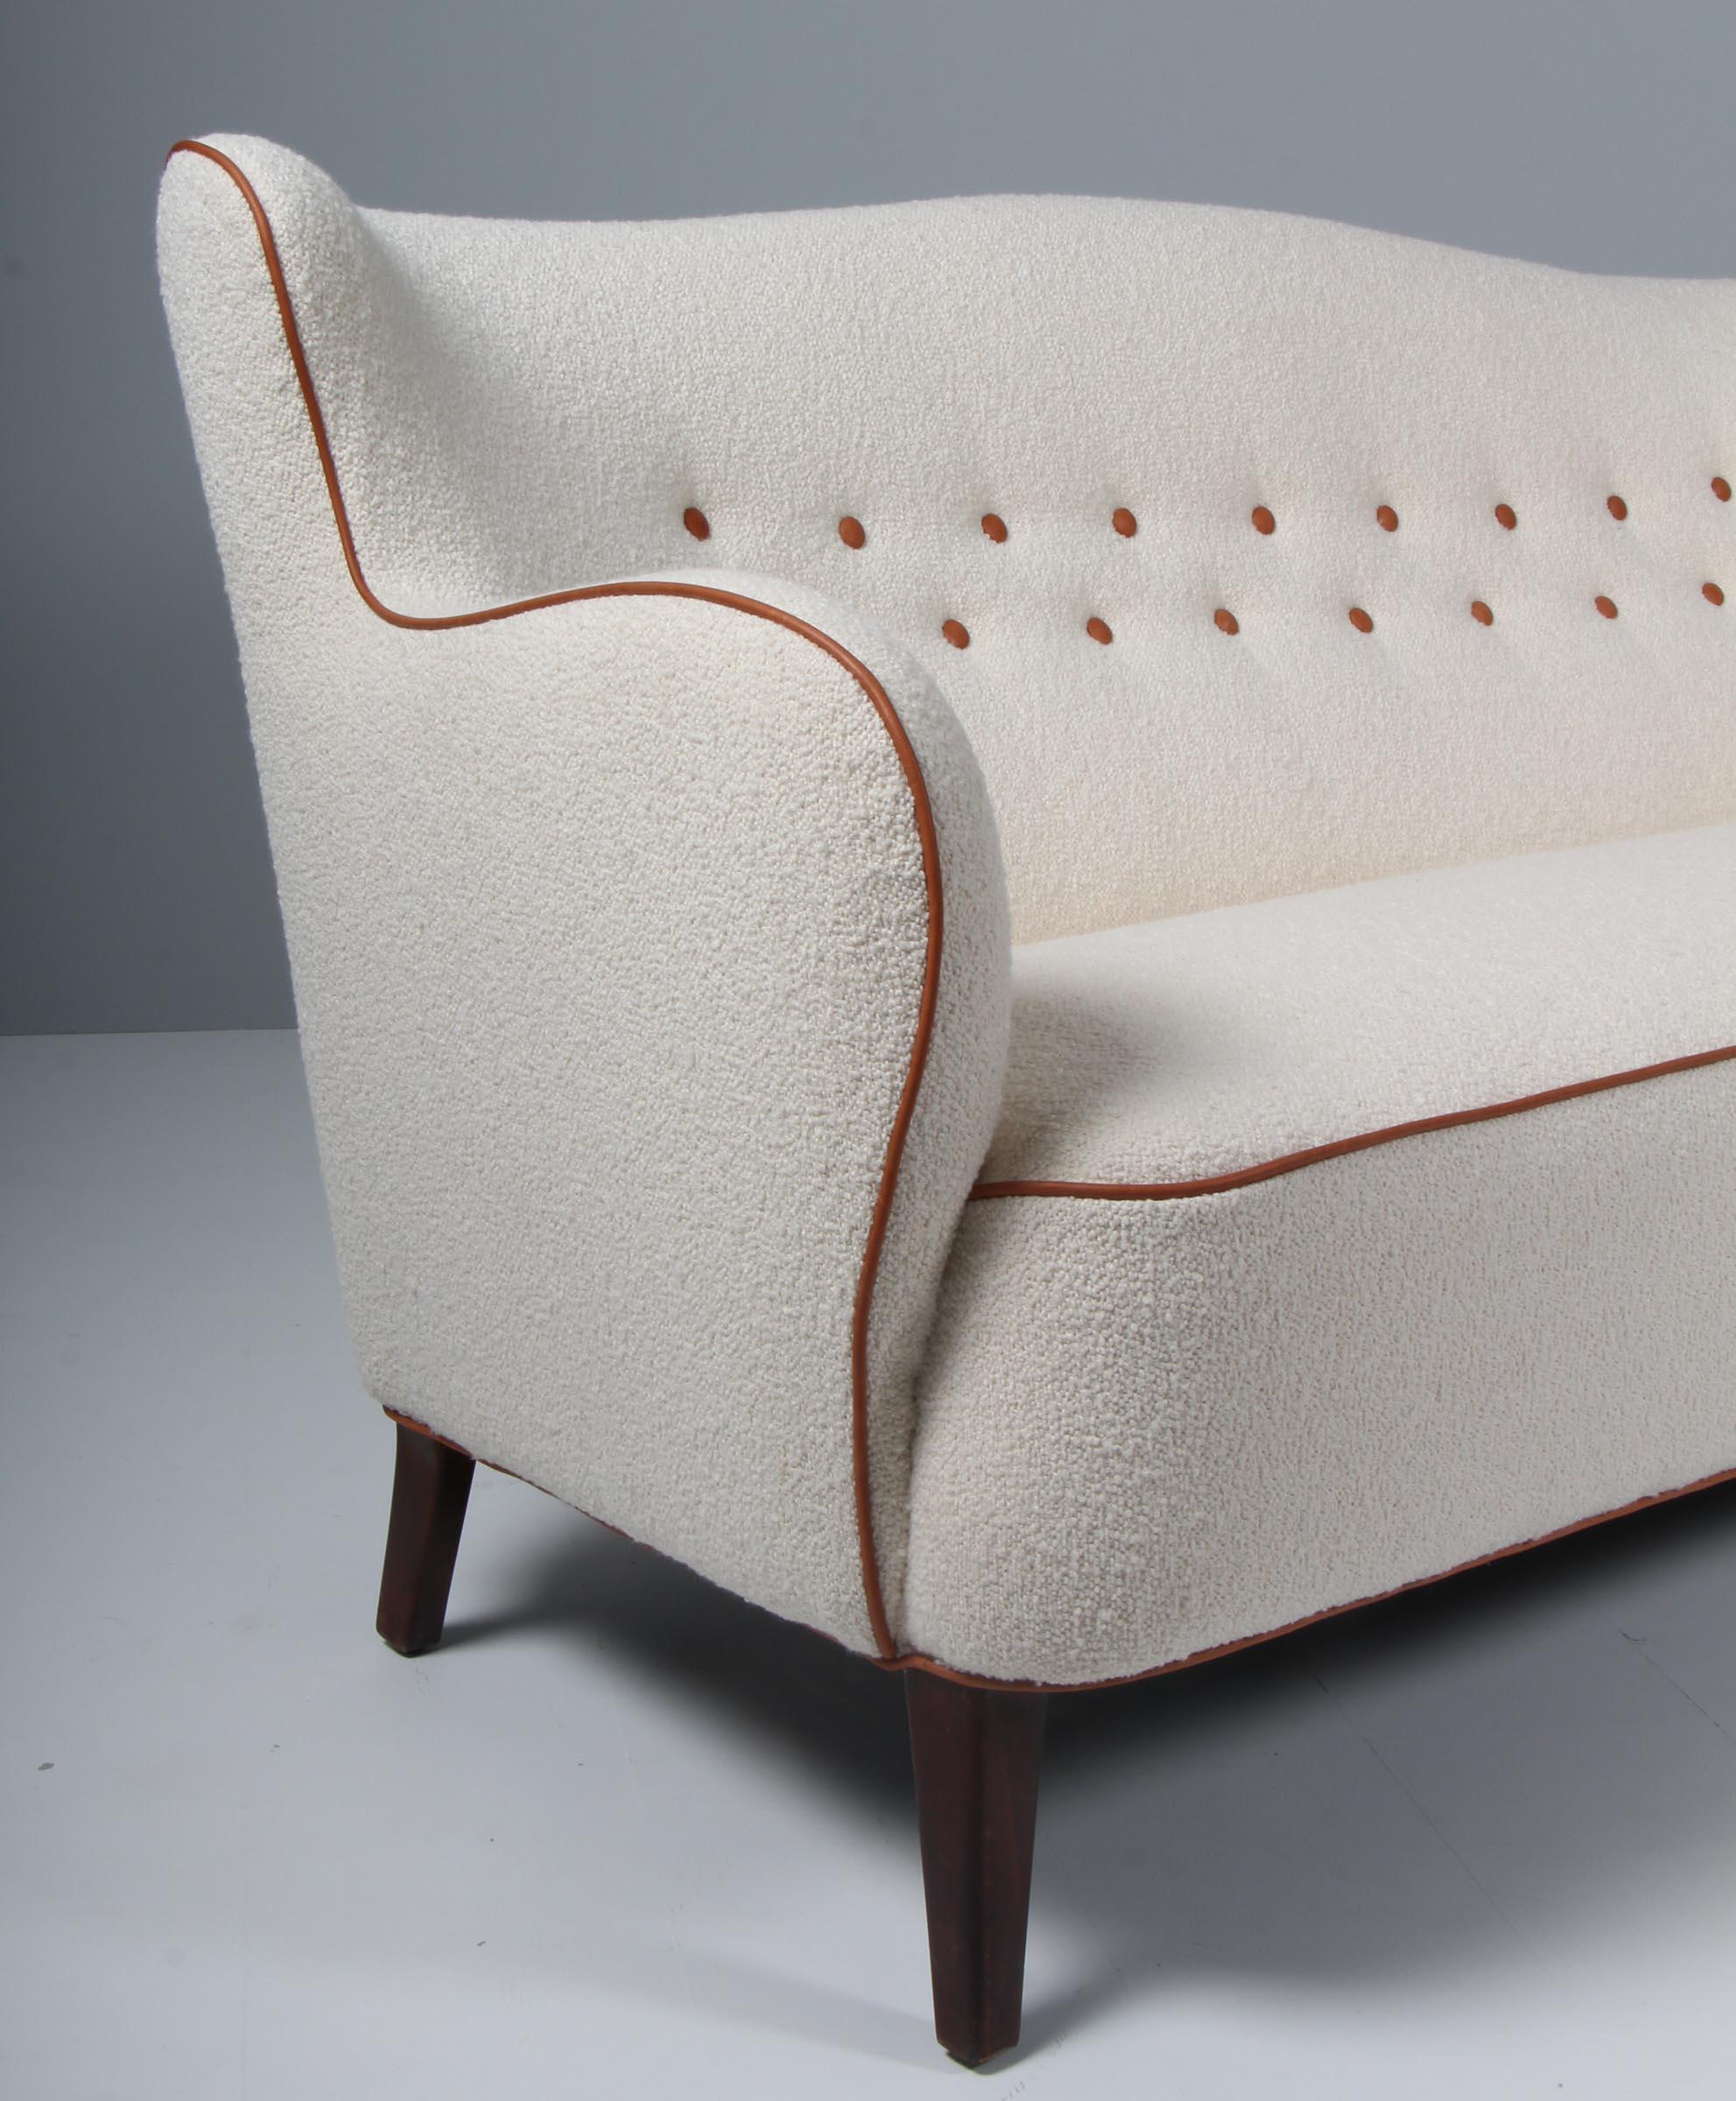 Danish Cabinetmaker, Three Seat Sofa in Boucle and Aniline Leather, 1950s In Excellent Condition For Sale In Esbjerg, DK